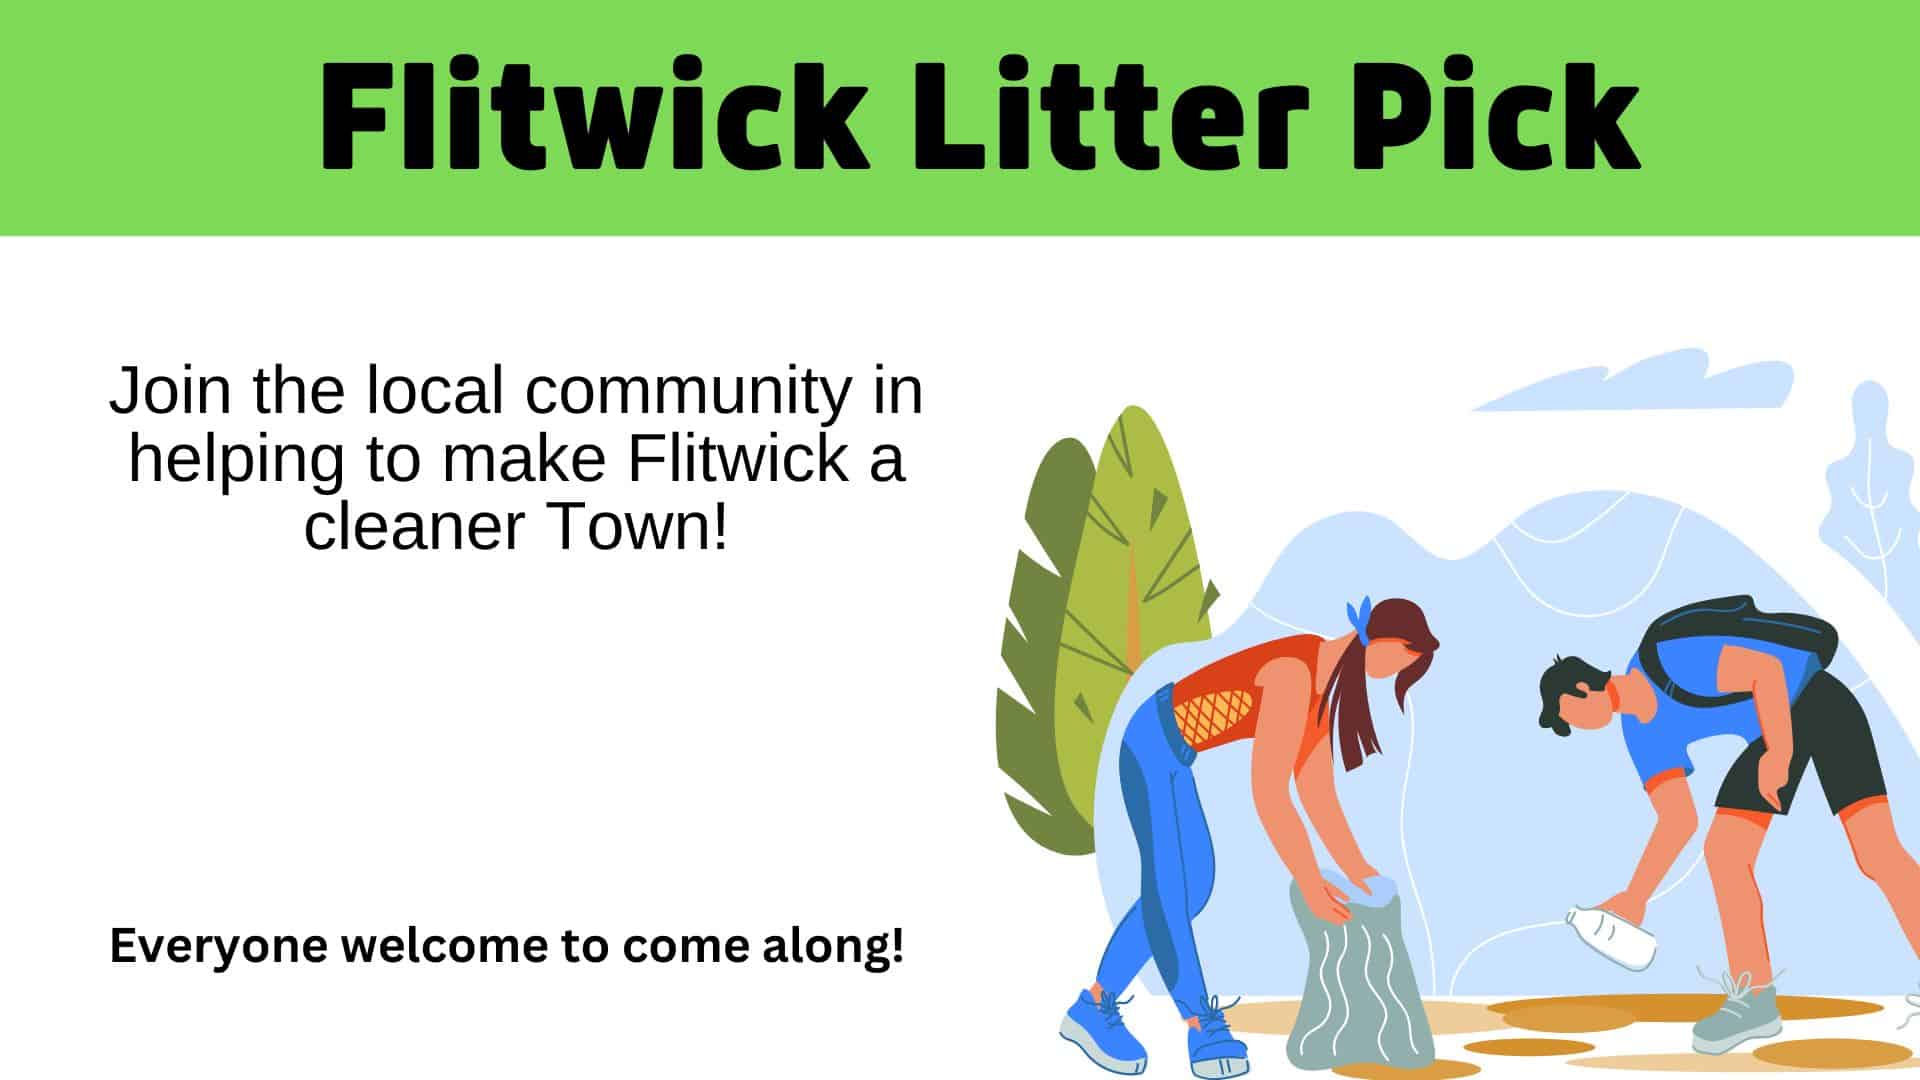 Flitwick Litter Pick.pdf (Facebook Event Cover)